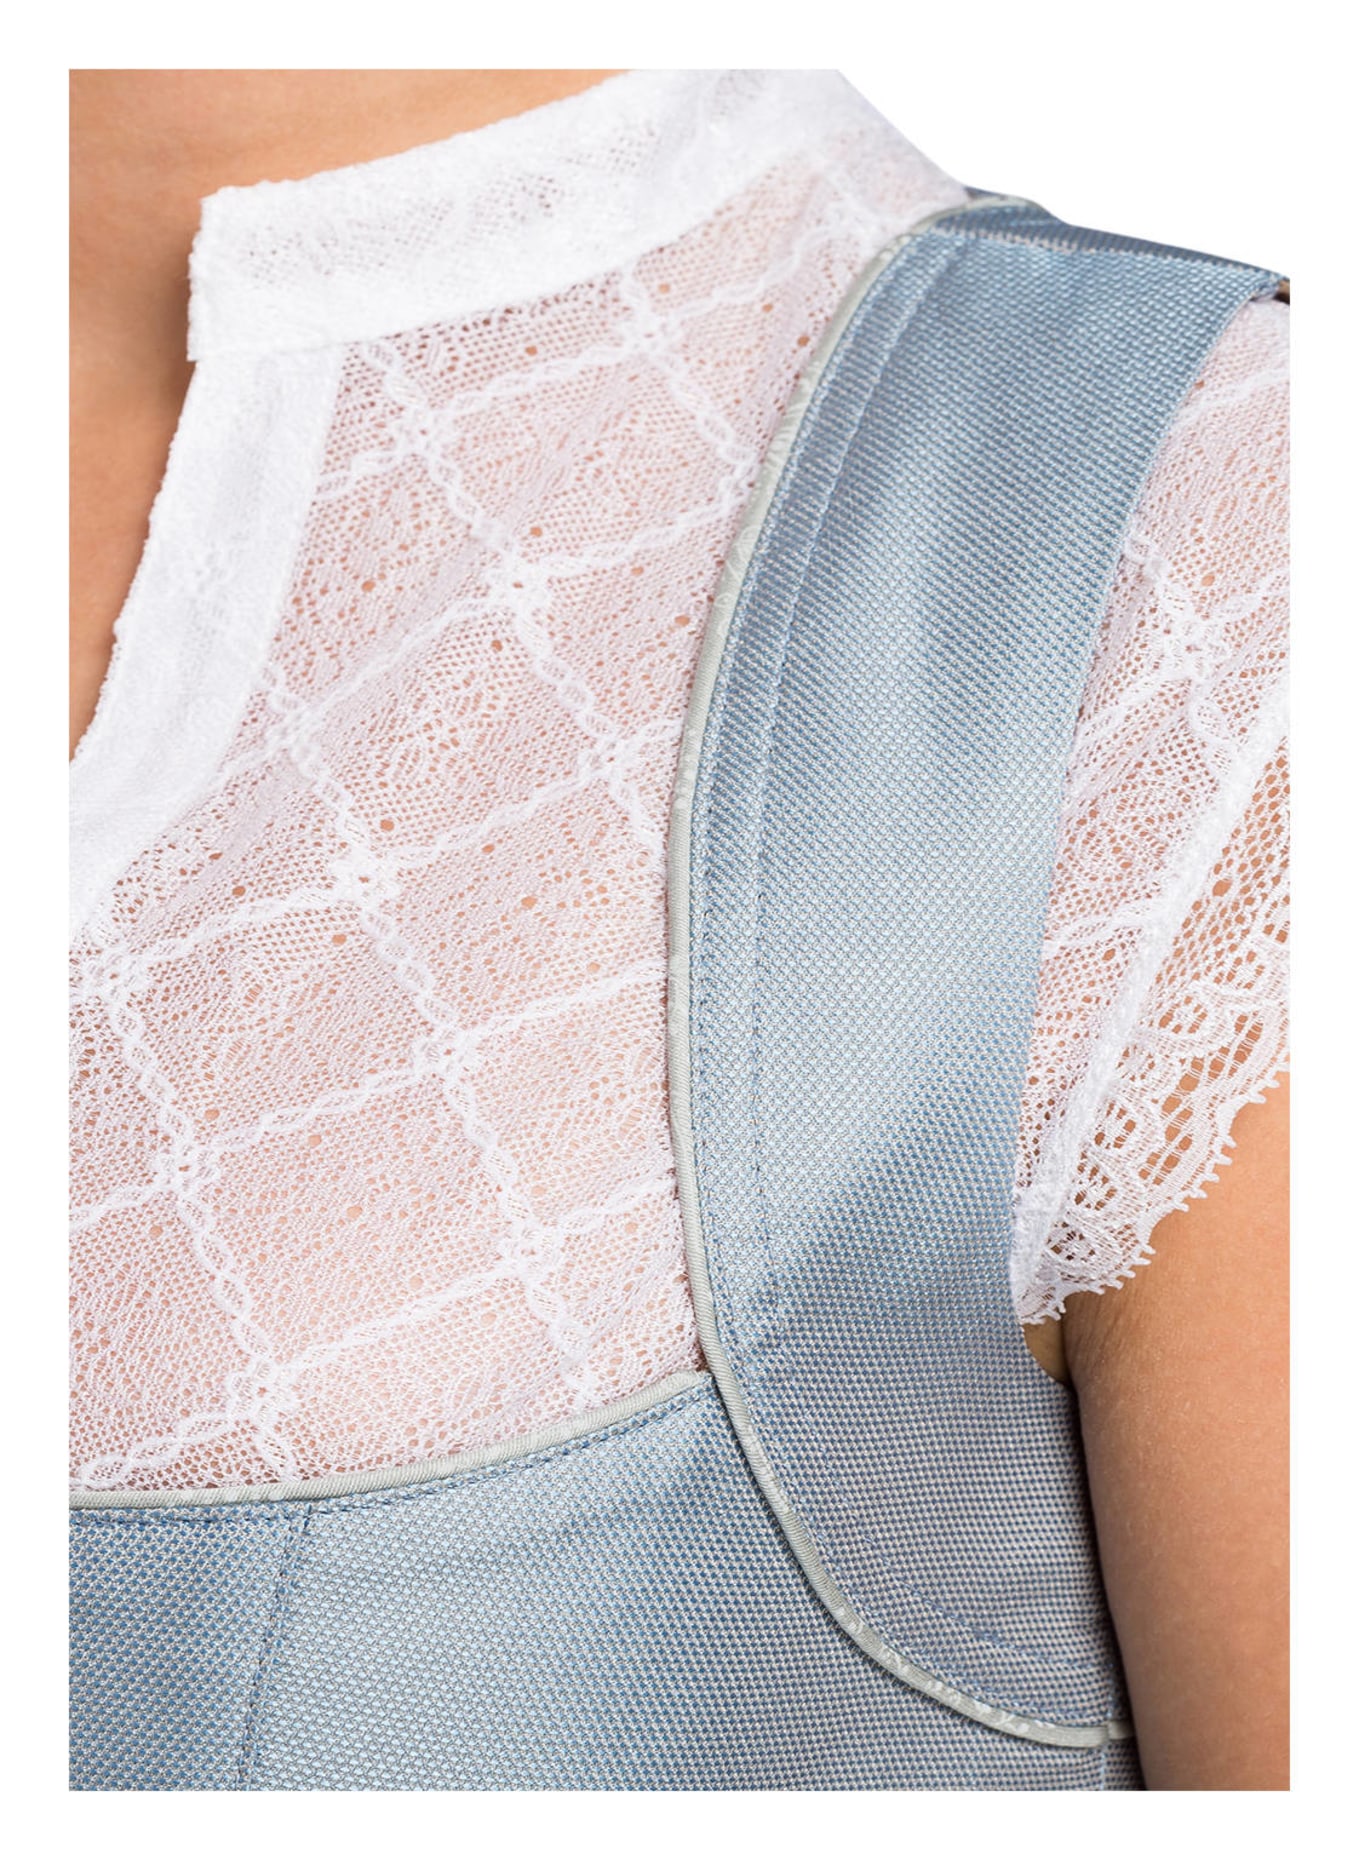 CocoVero Dirndl blouse FRANZI, Color: WEISS (Image 3)